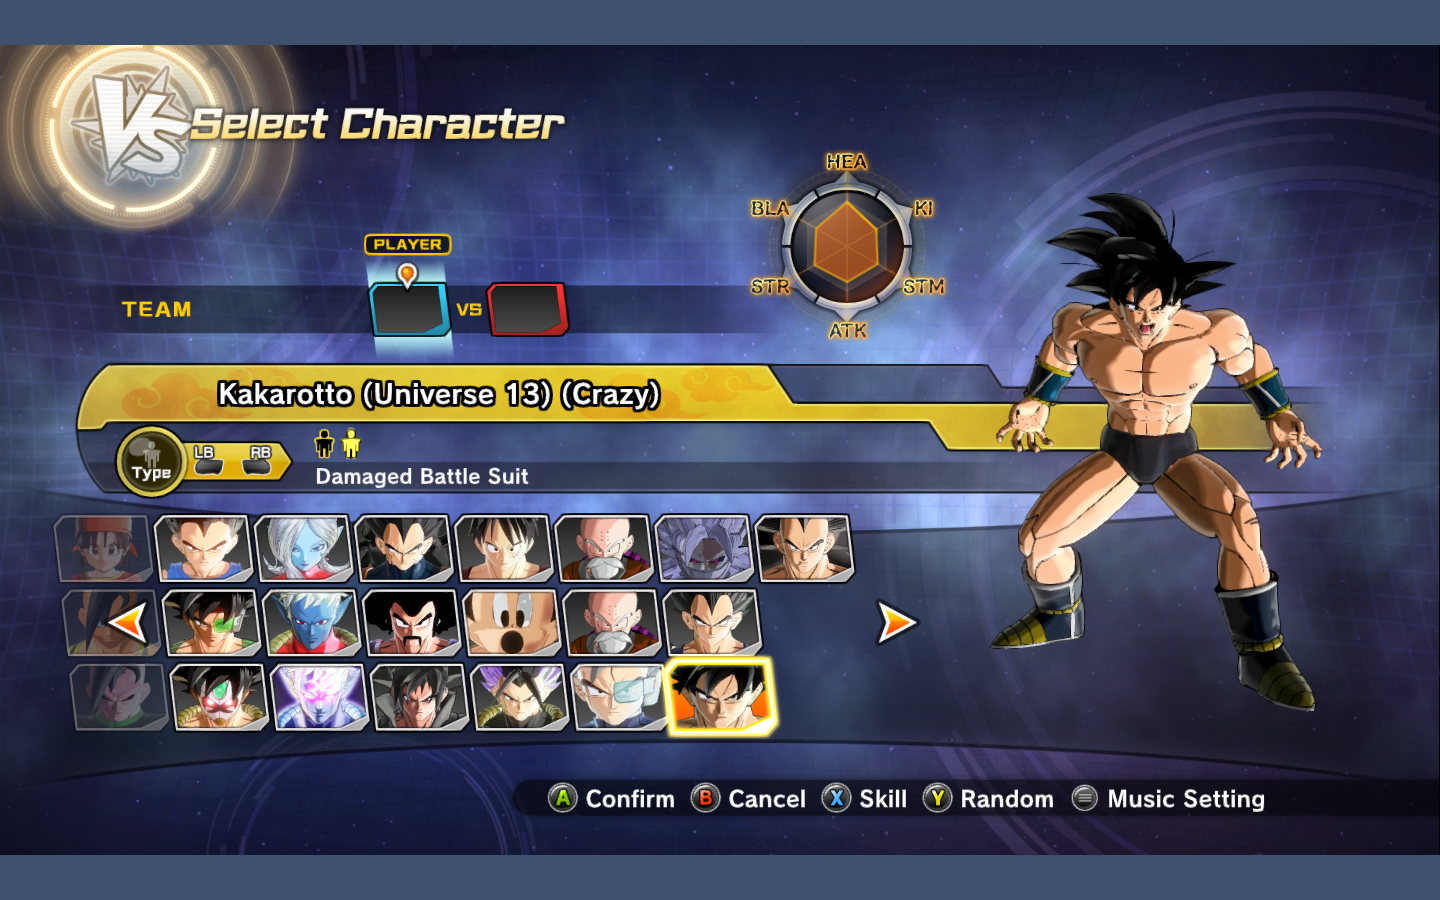 DB_Dev] on X: The new name of the game that will fit with the Story Mode  is Dragon Ball: Xeno Multiverse [DBXM]  / X